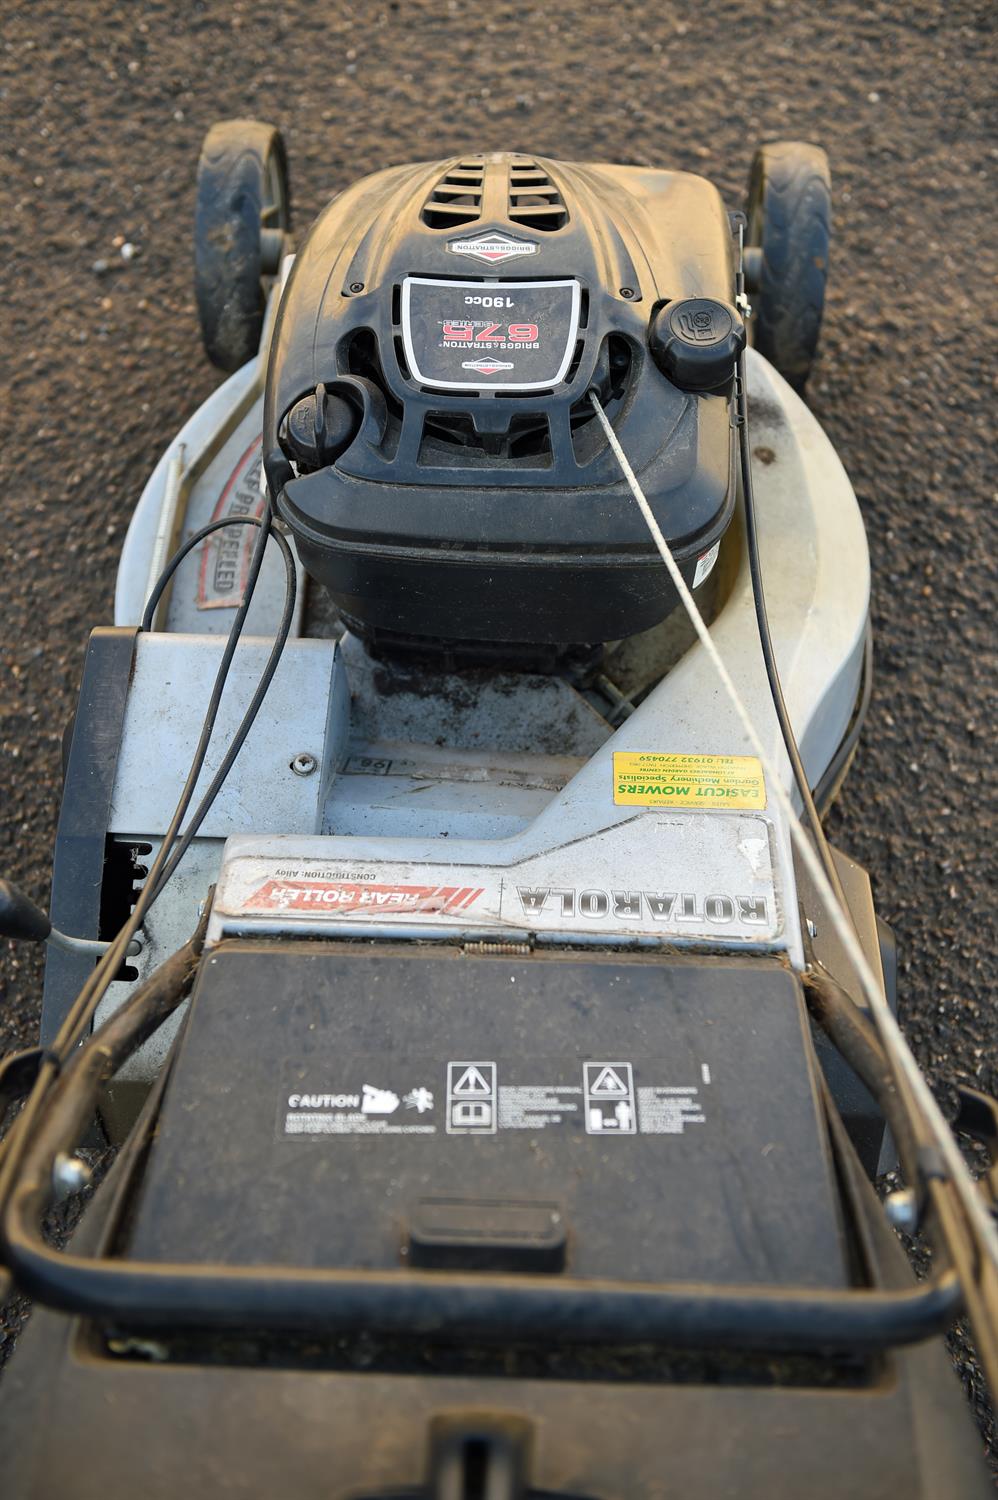 Masport self propelled , Briggs & Stratton 675 Series 190 cc petrol mower with rear roller - Image 6 of 6